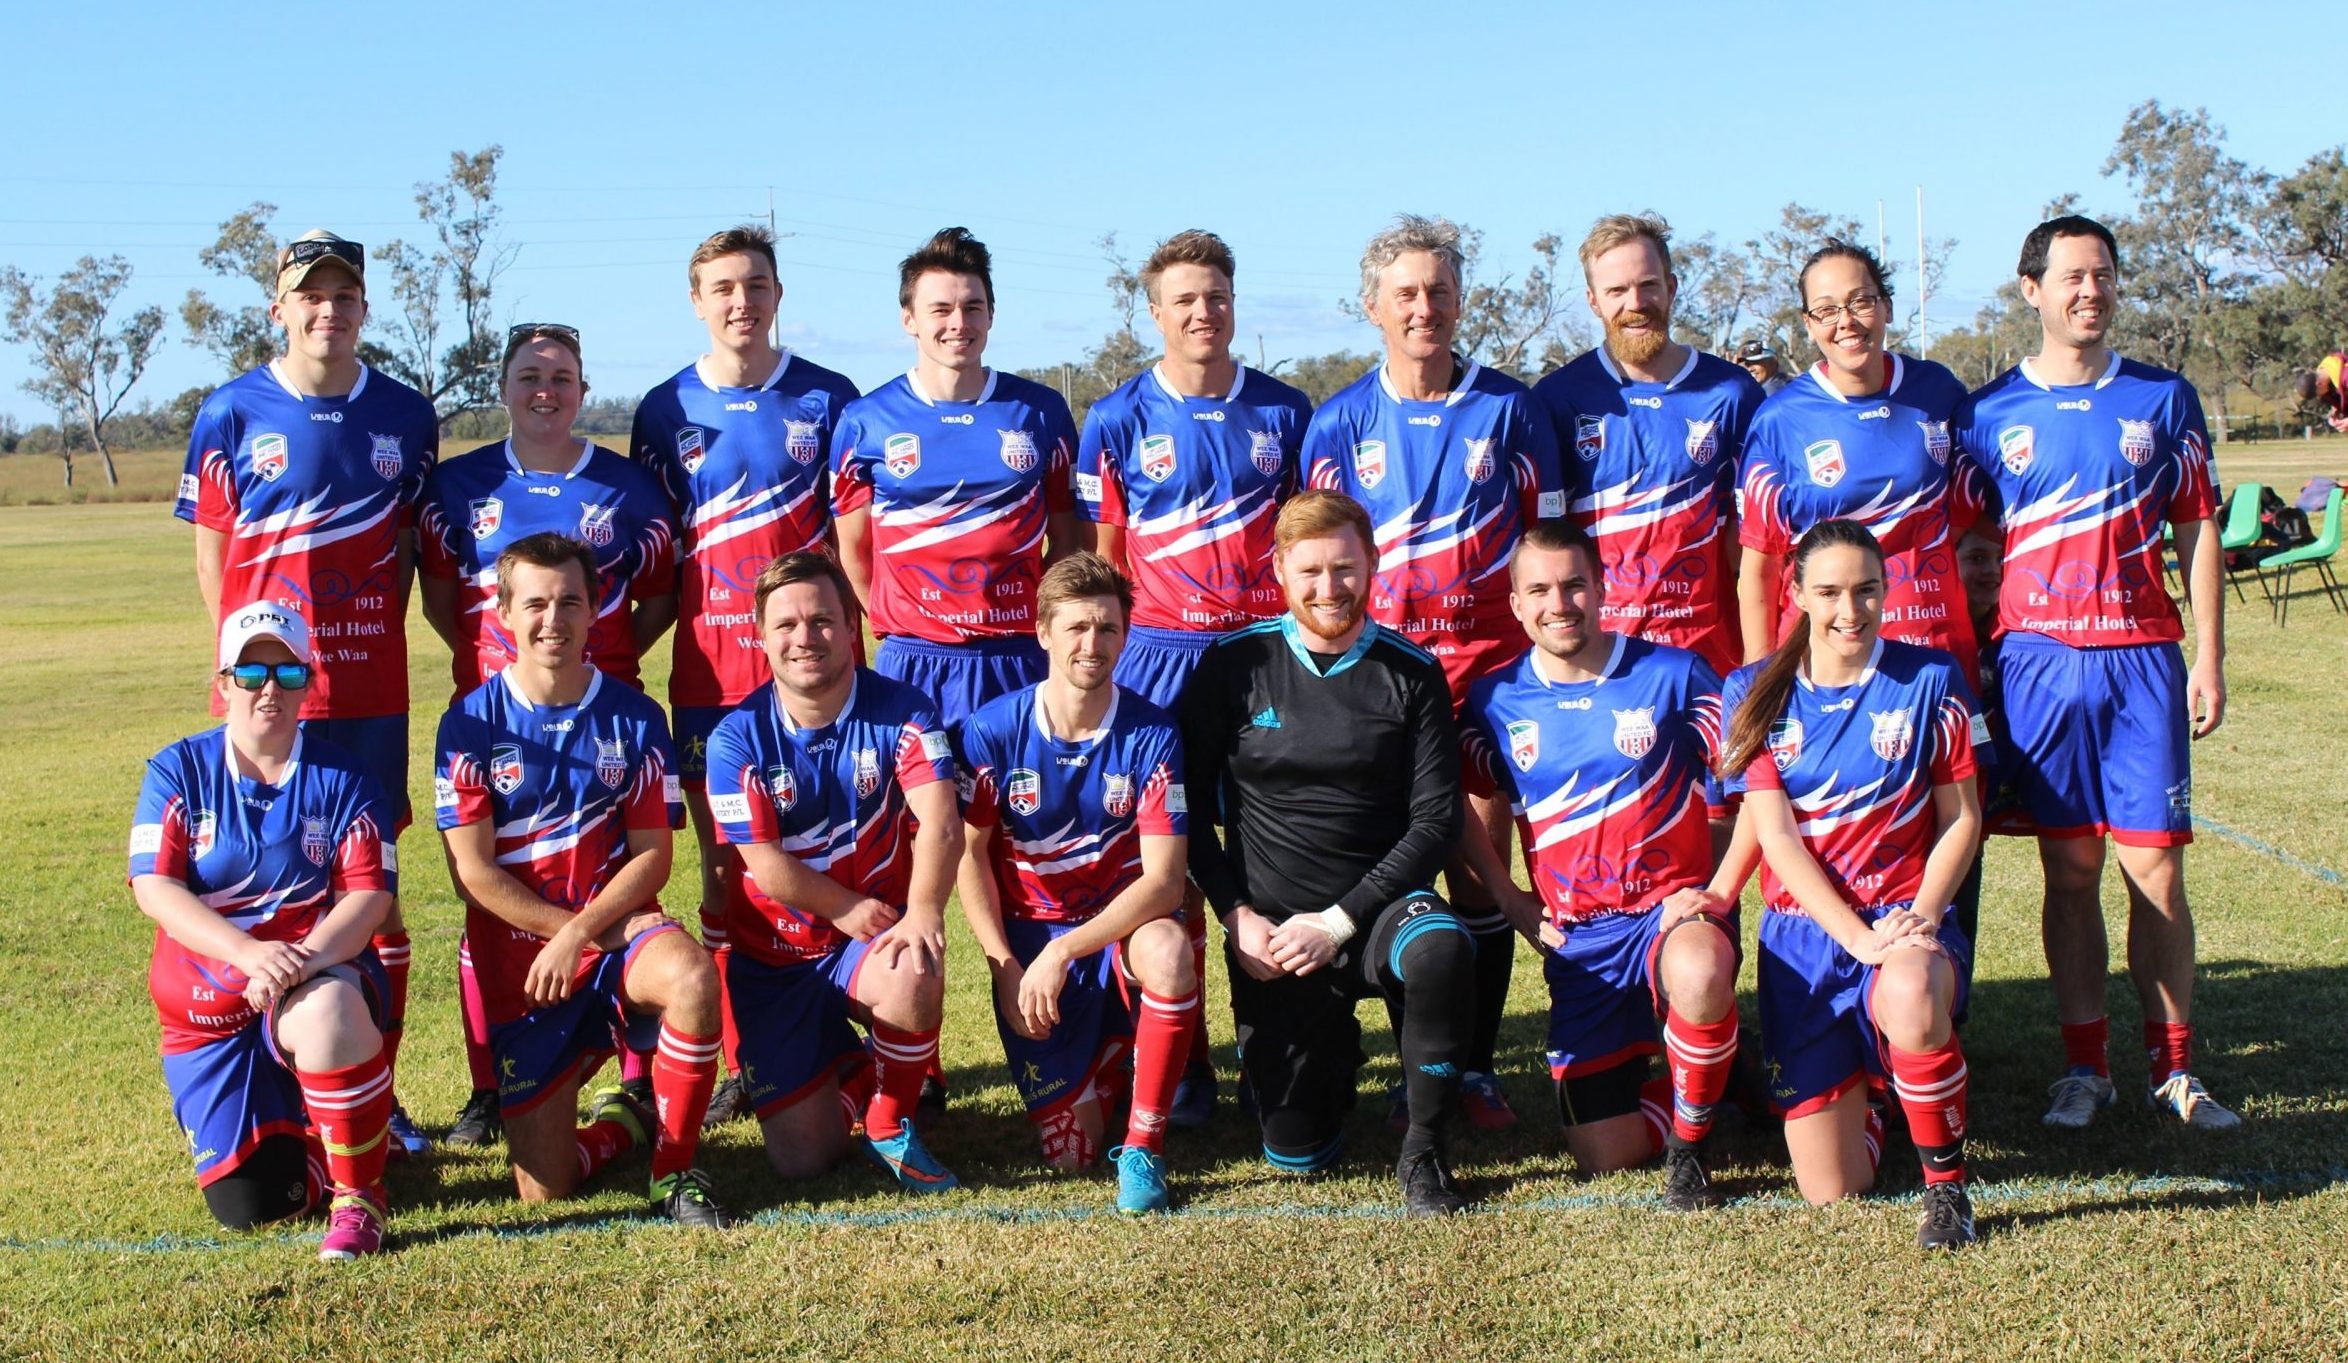 Wee Waa United FC kick off its Namoi Soccer League title defence with a win